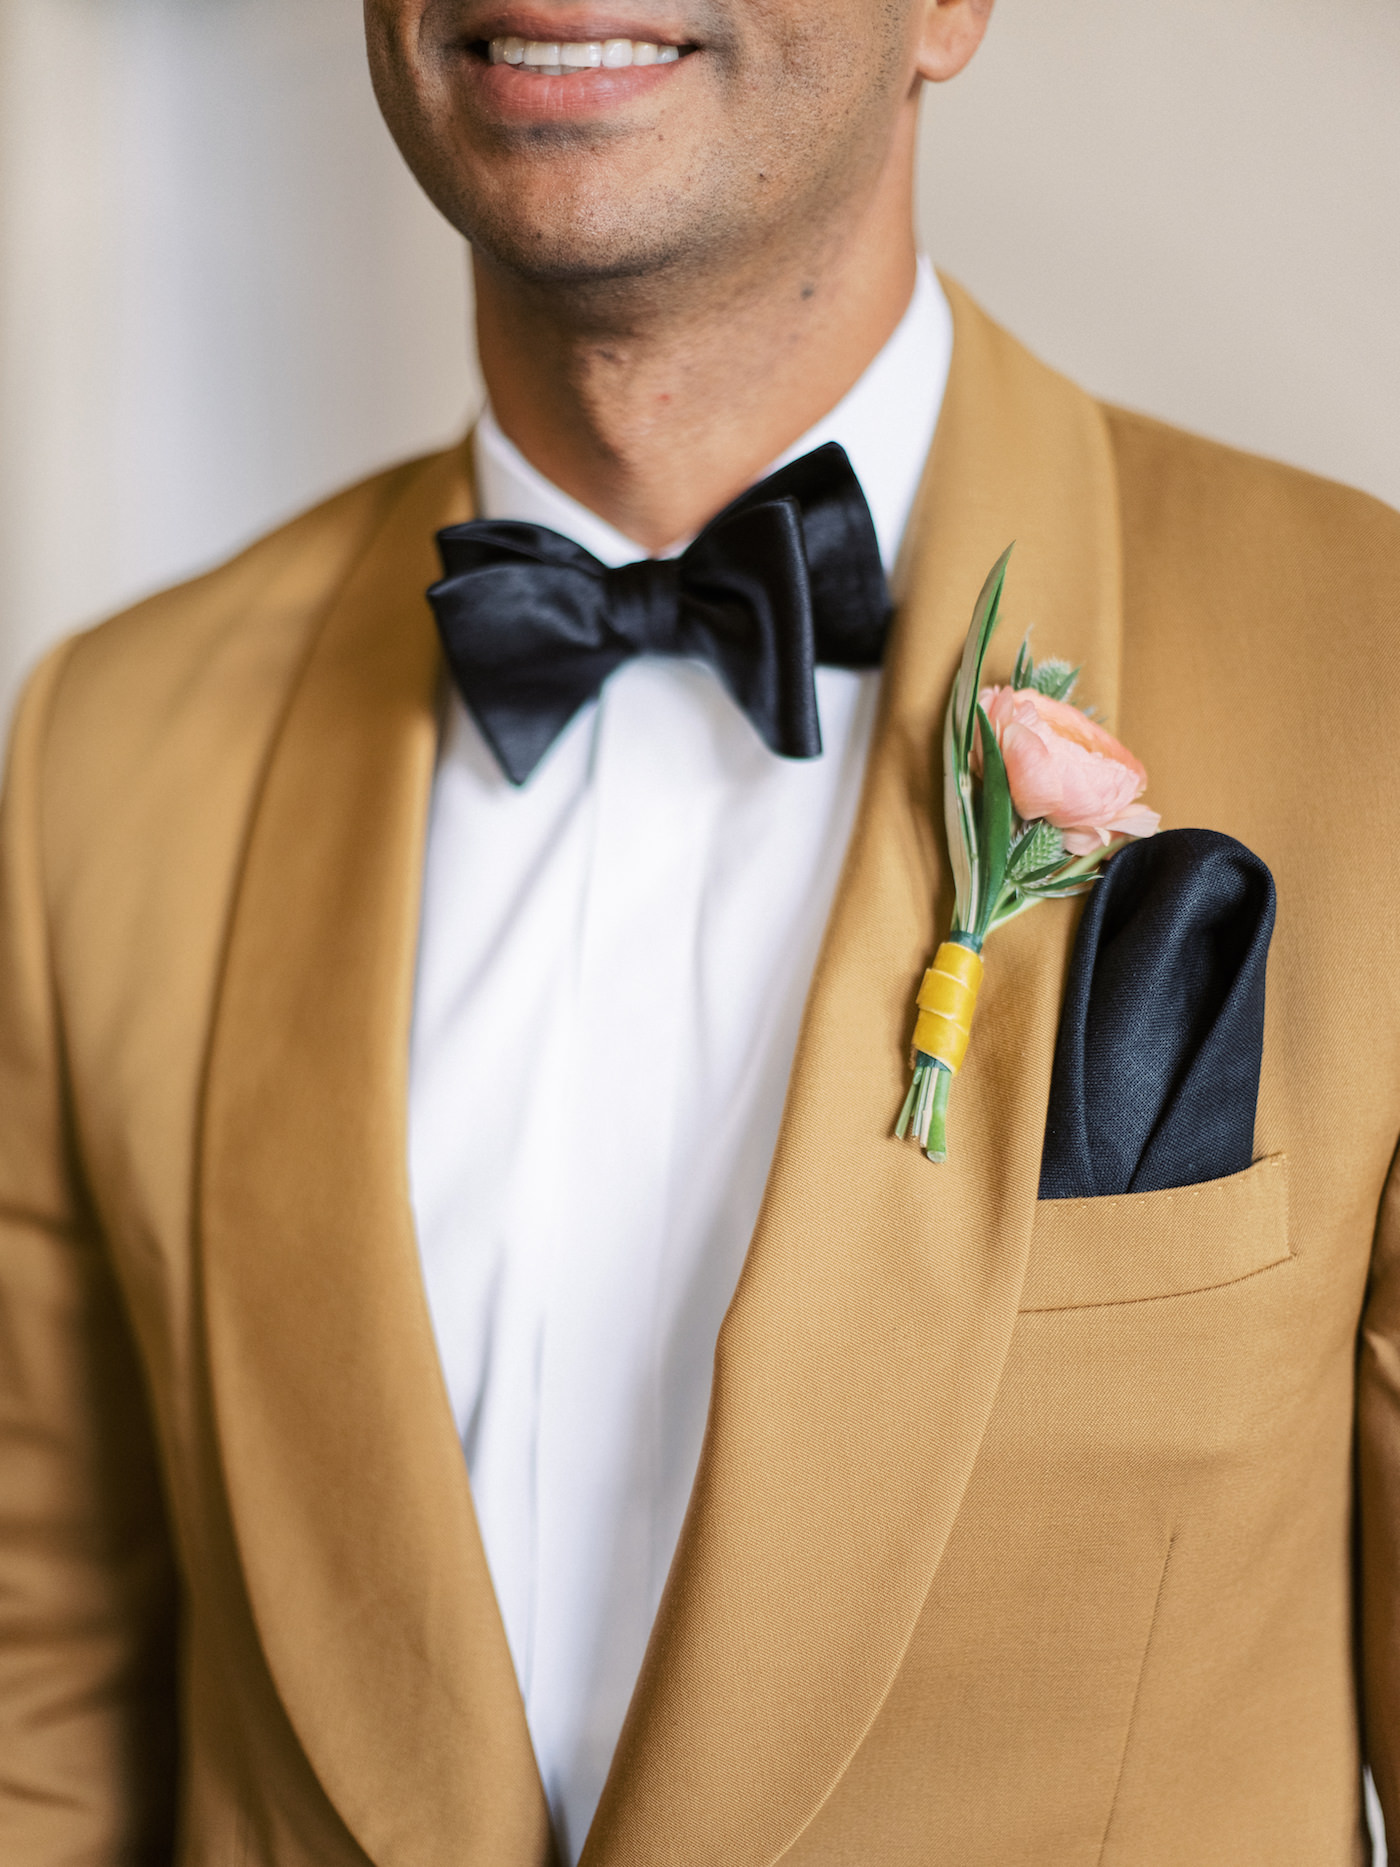 Elegant Florida Groom Wearing Yellow Mustard Suit Jacket from The Black Tux, Light Pink Floral Boutonnière with Yellow Ribbon, Black Silk Bow Tie and Pocket Square